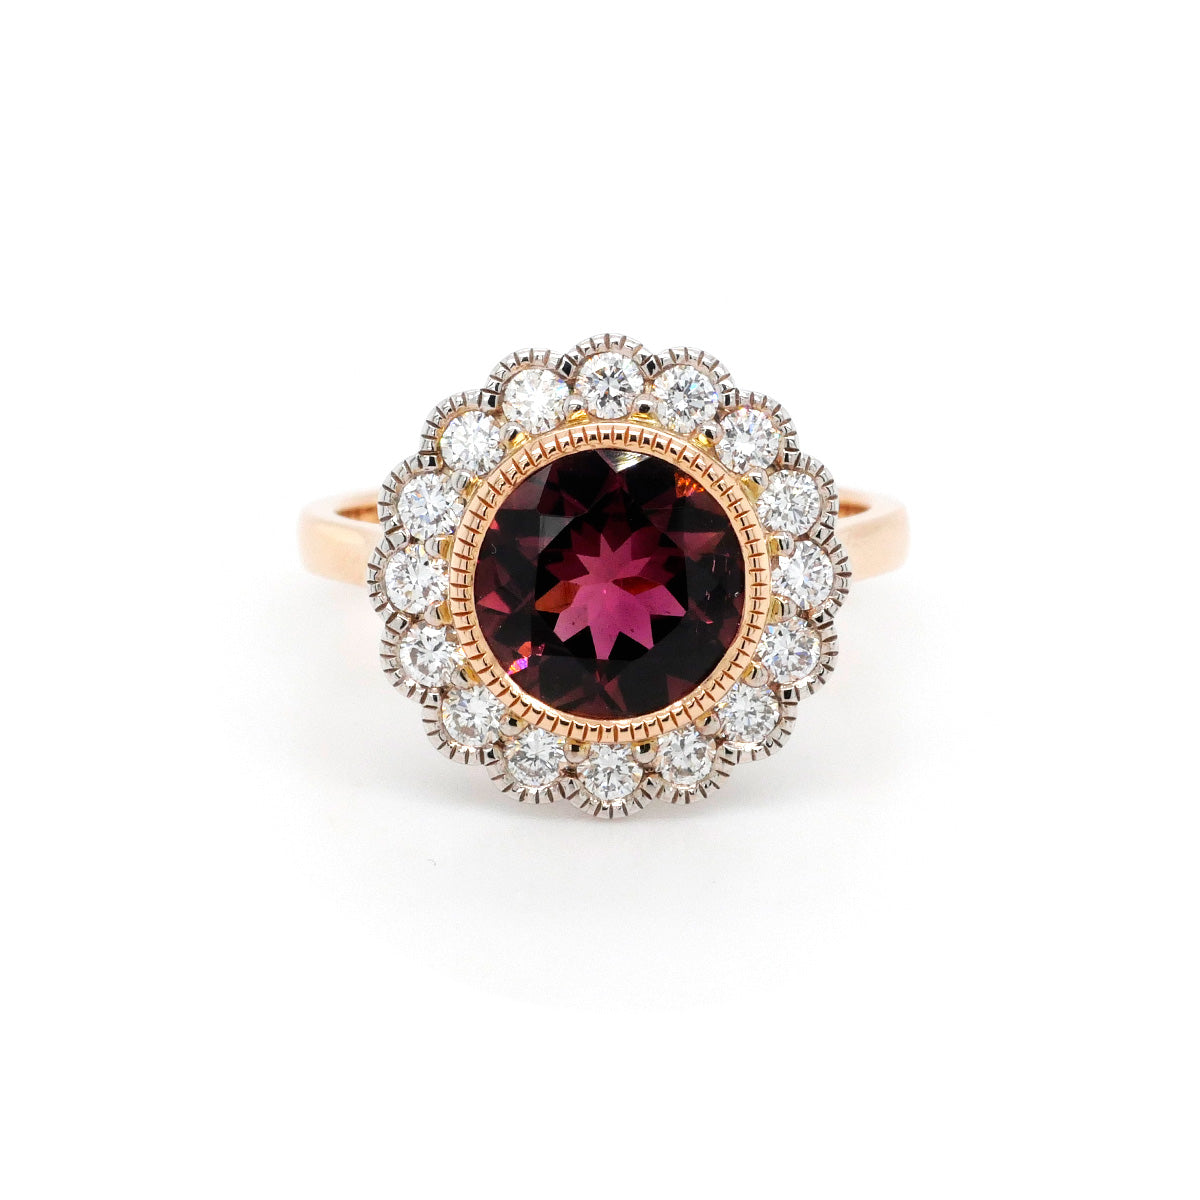 18ct Yellow and White Gold Pink Tourmaline and Diamond Cluster Ring